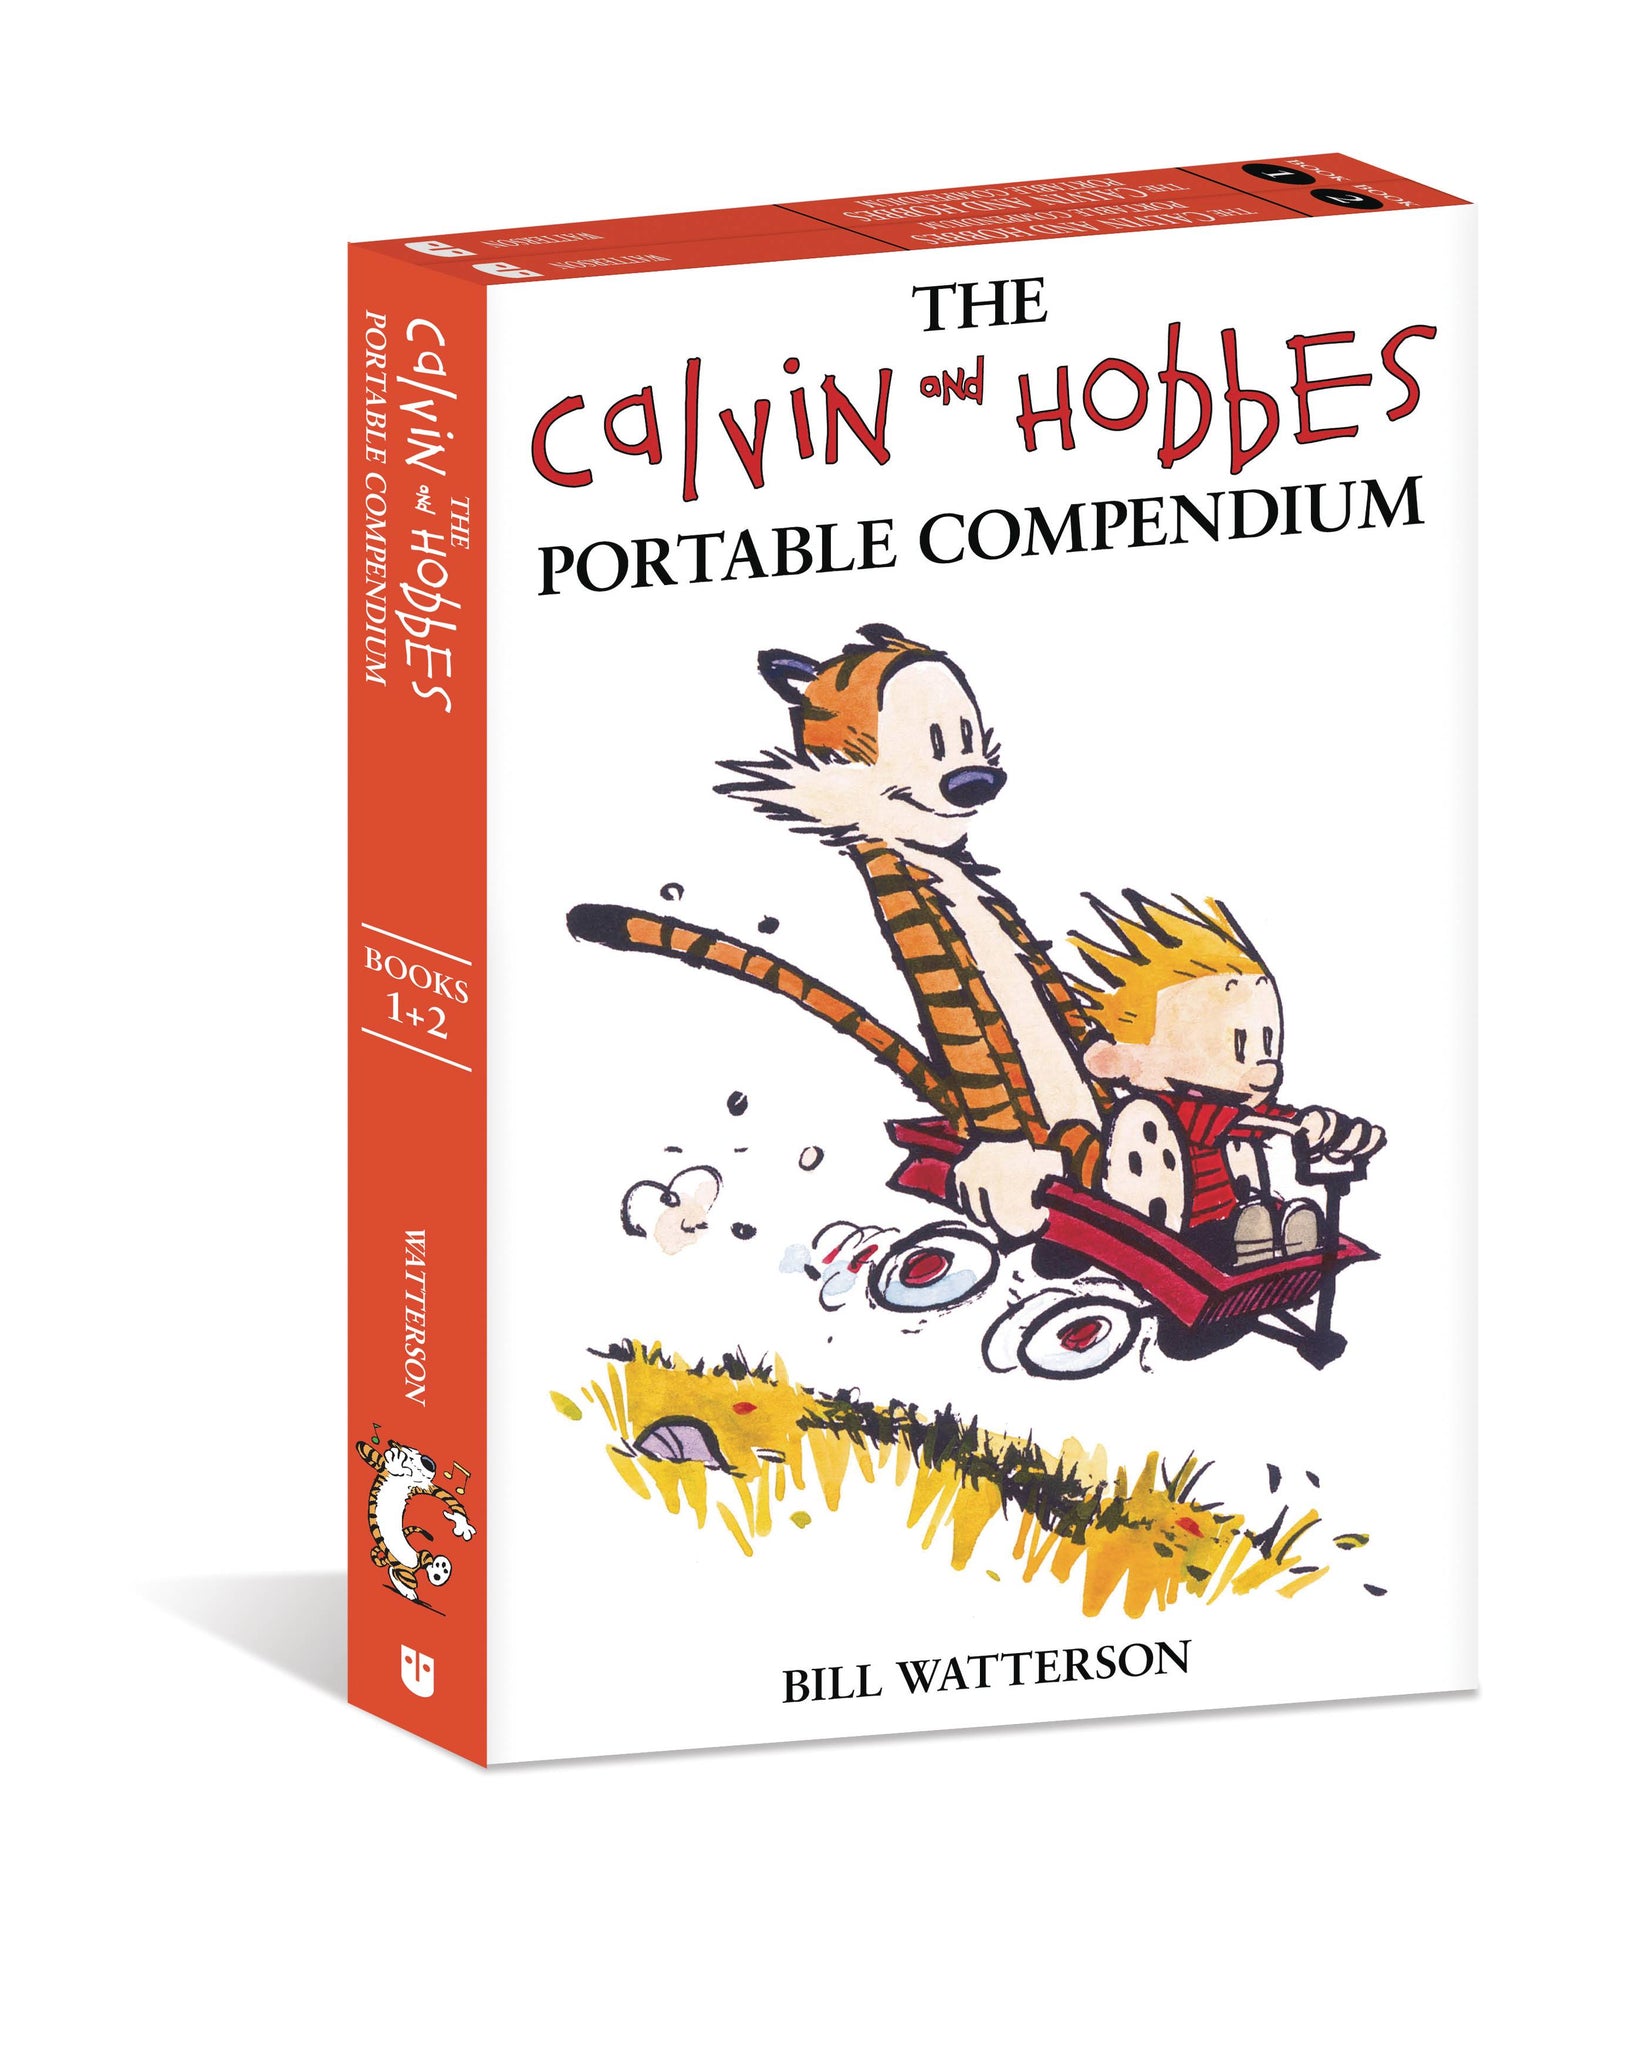 Calvin and Hobbes: The Portable Compendium